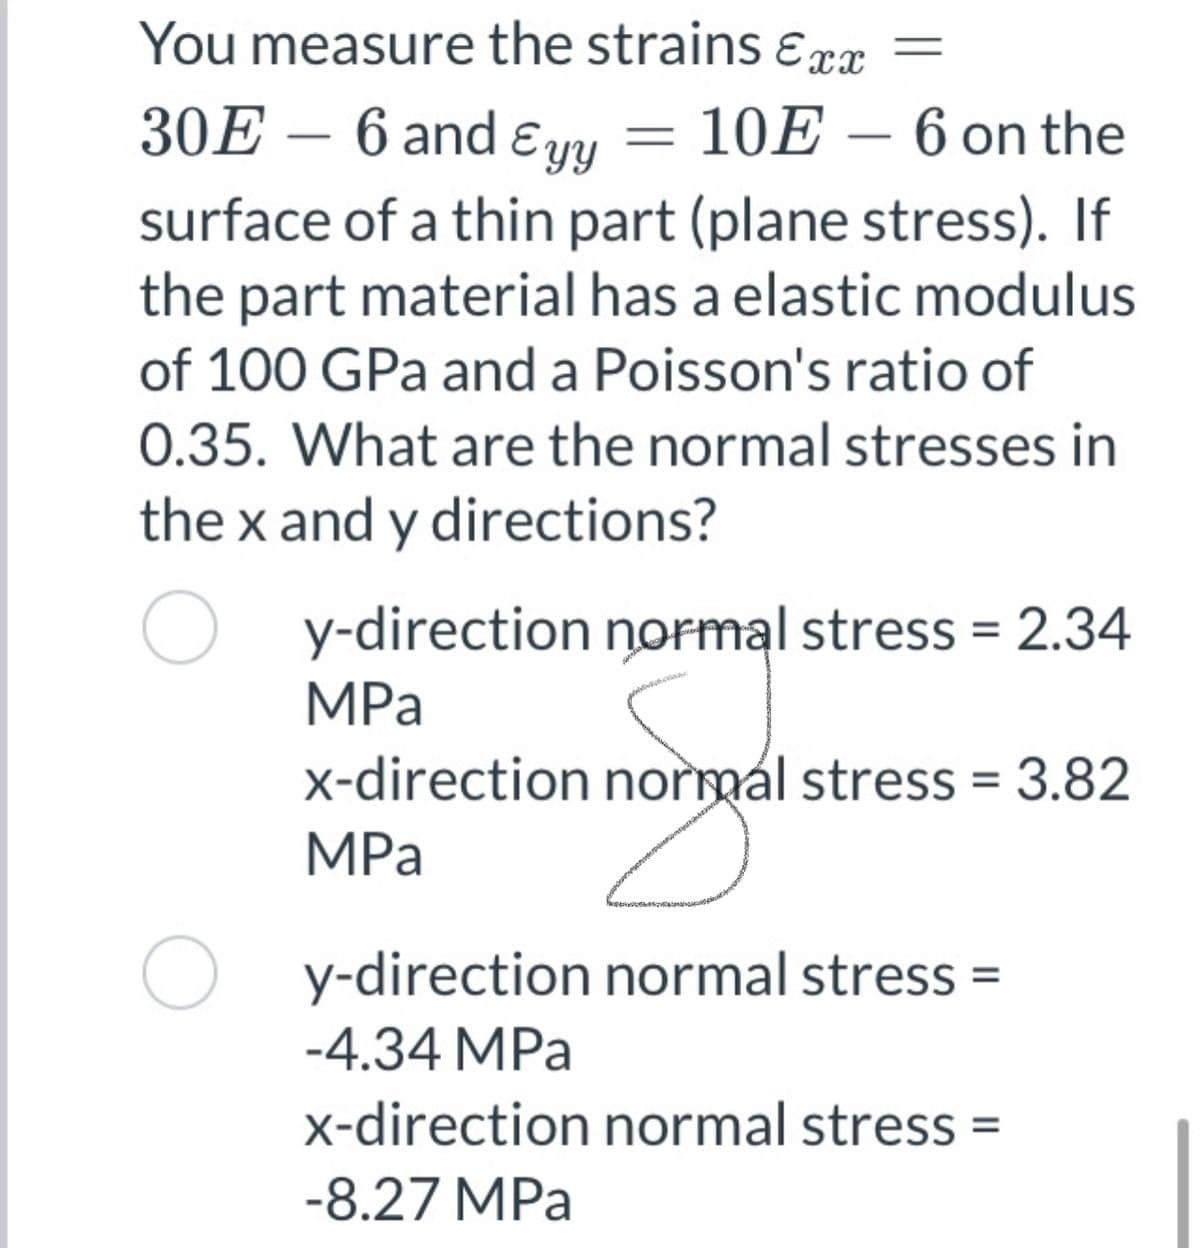 You measure the strains ɛrx =
30E – 6 and ɛyy = 10E – 6 on the
surface of a thin part (plane stress). If
the part material has a elastic modulus
of 100 GPa and a Poisson's ratio of
-
0.35. What are the normal stresses in
the x and y directions?
y-direction normal stress = 2.34
MPа
x-direction normal stress = 3.82
MPa
O y-direction normal stress =
-4.34 MPa
x-direction normal stress =
-8.27 MPa
